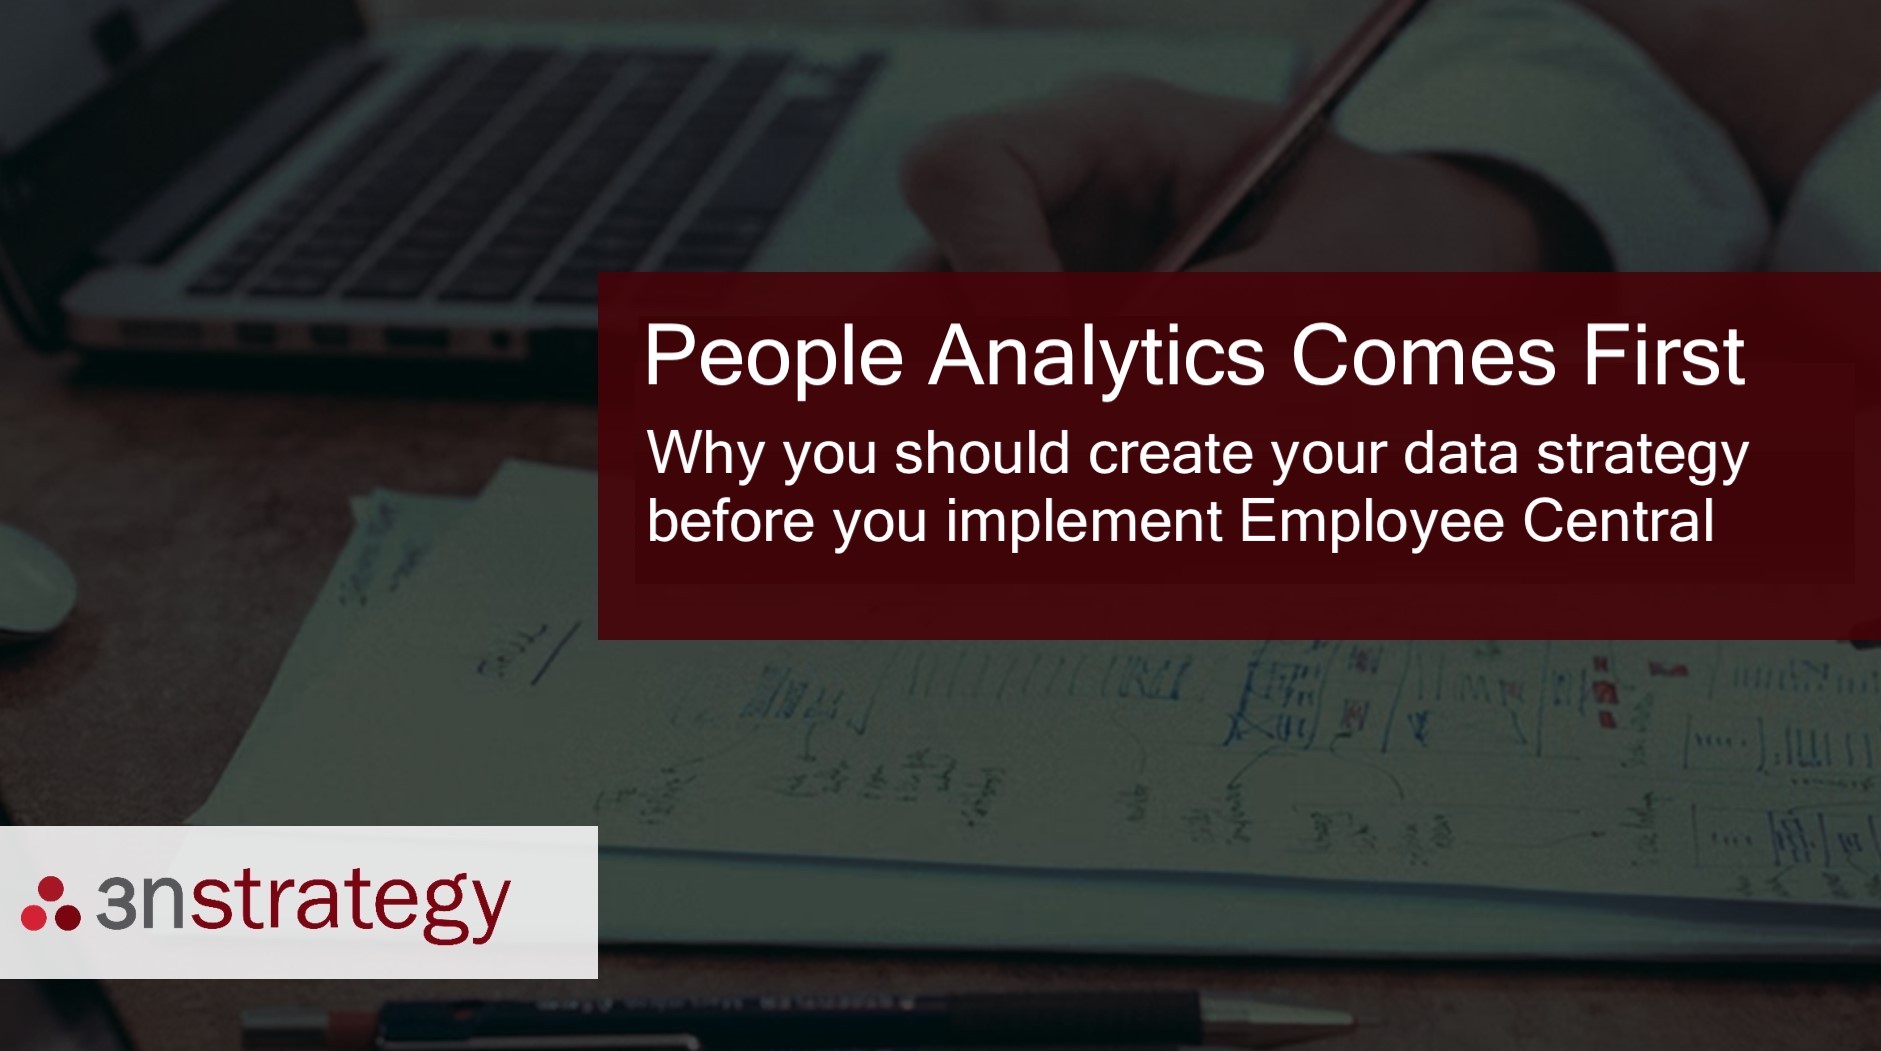 People Analytics comes first